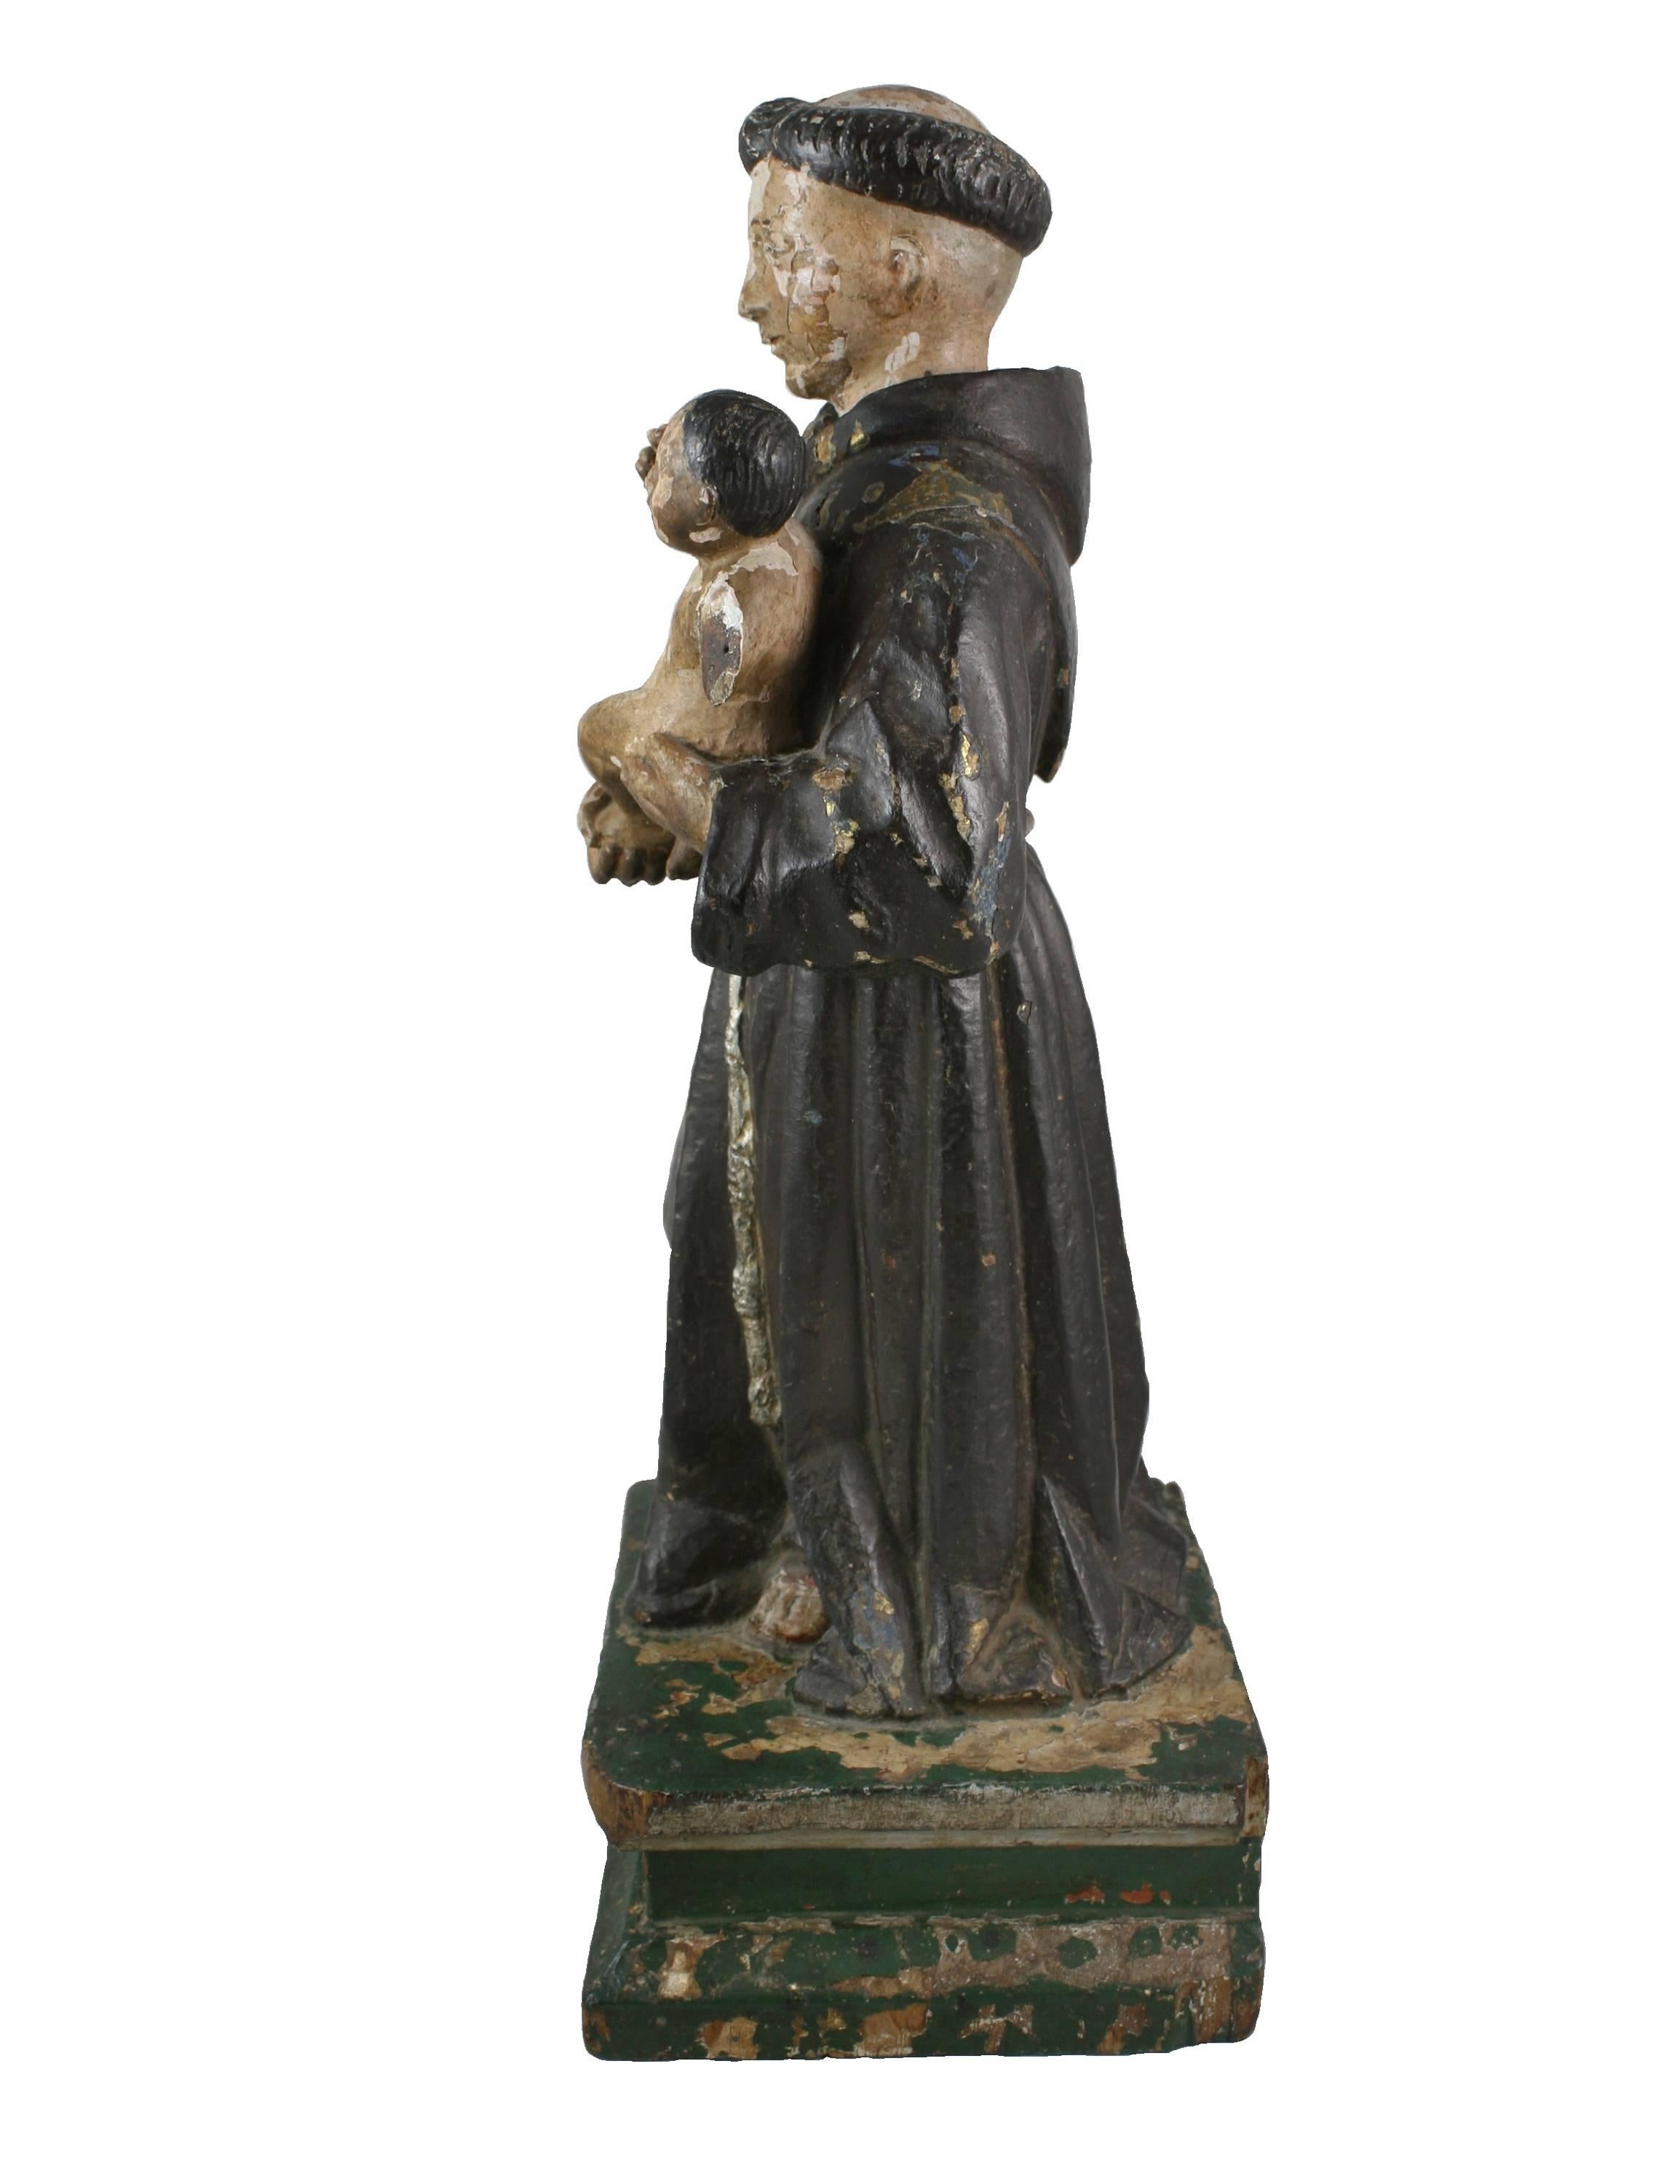 Hand-carved polychrome wood santo of Saint Anthony of Padua. Traditionally depicted, wearing friars robes and holding the infant Jesus. A lovely example of Spanish Colonial devotional art.
 Saint Anthony of Padua is the patron saint of lost